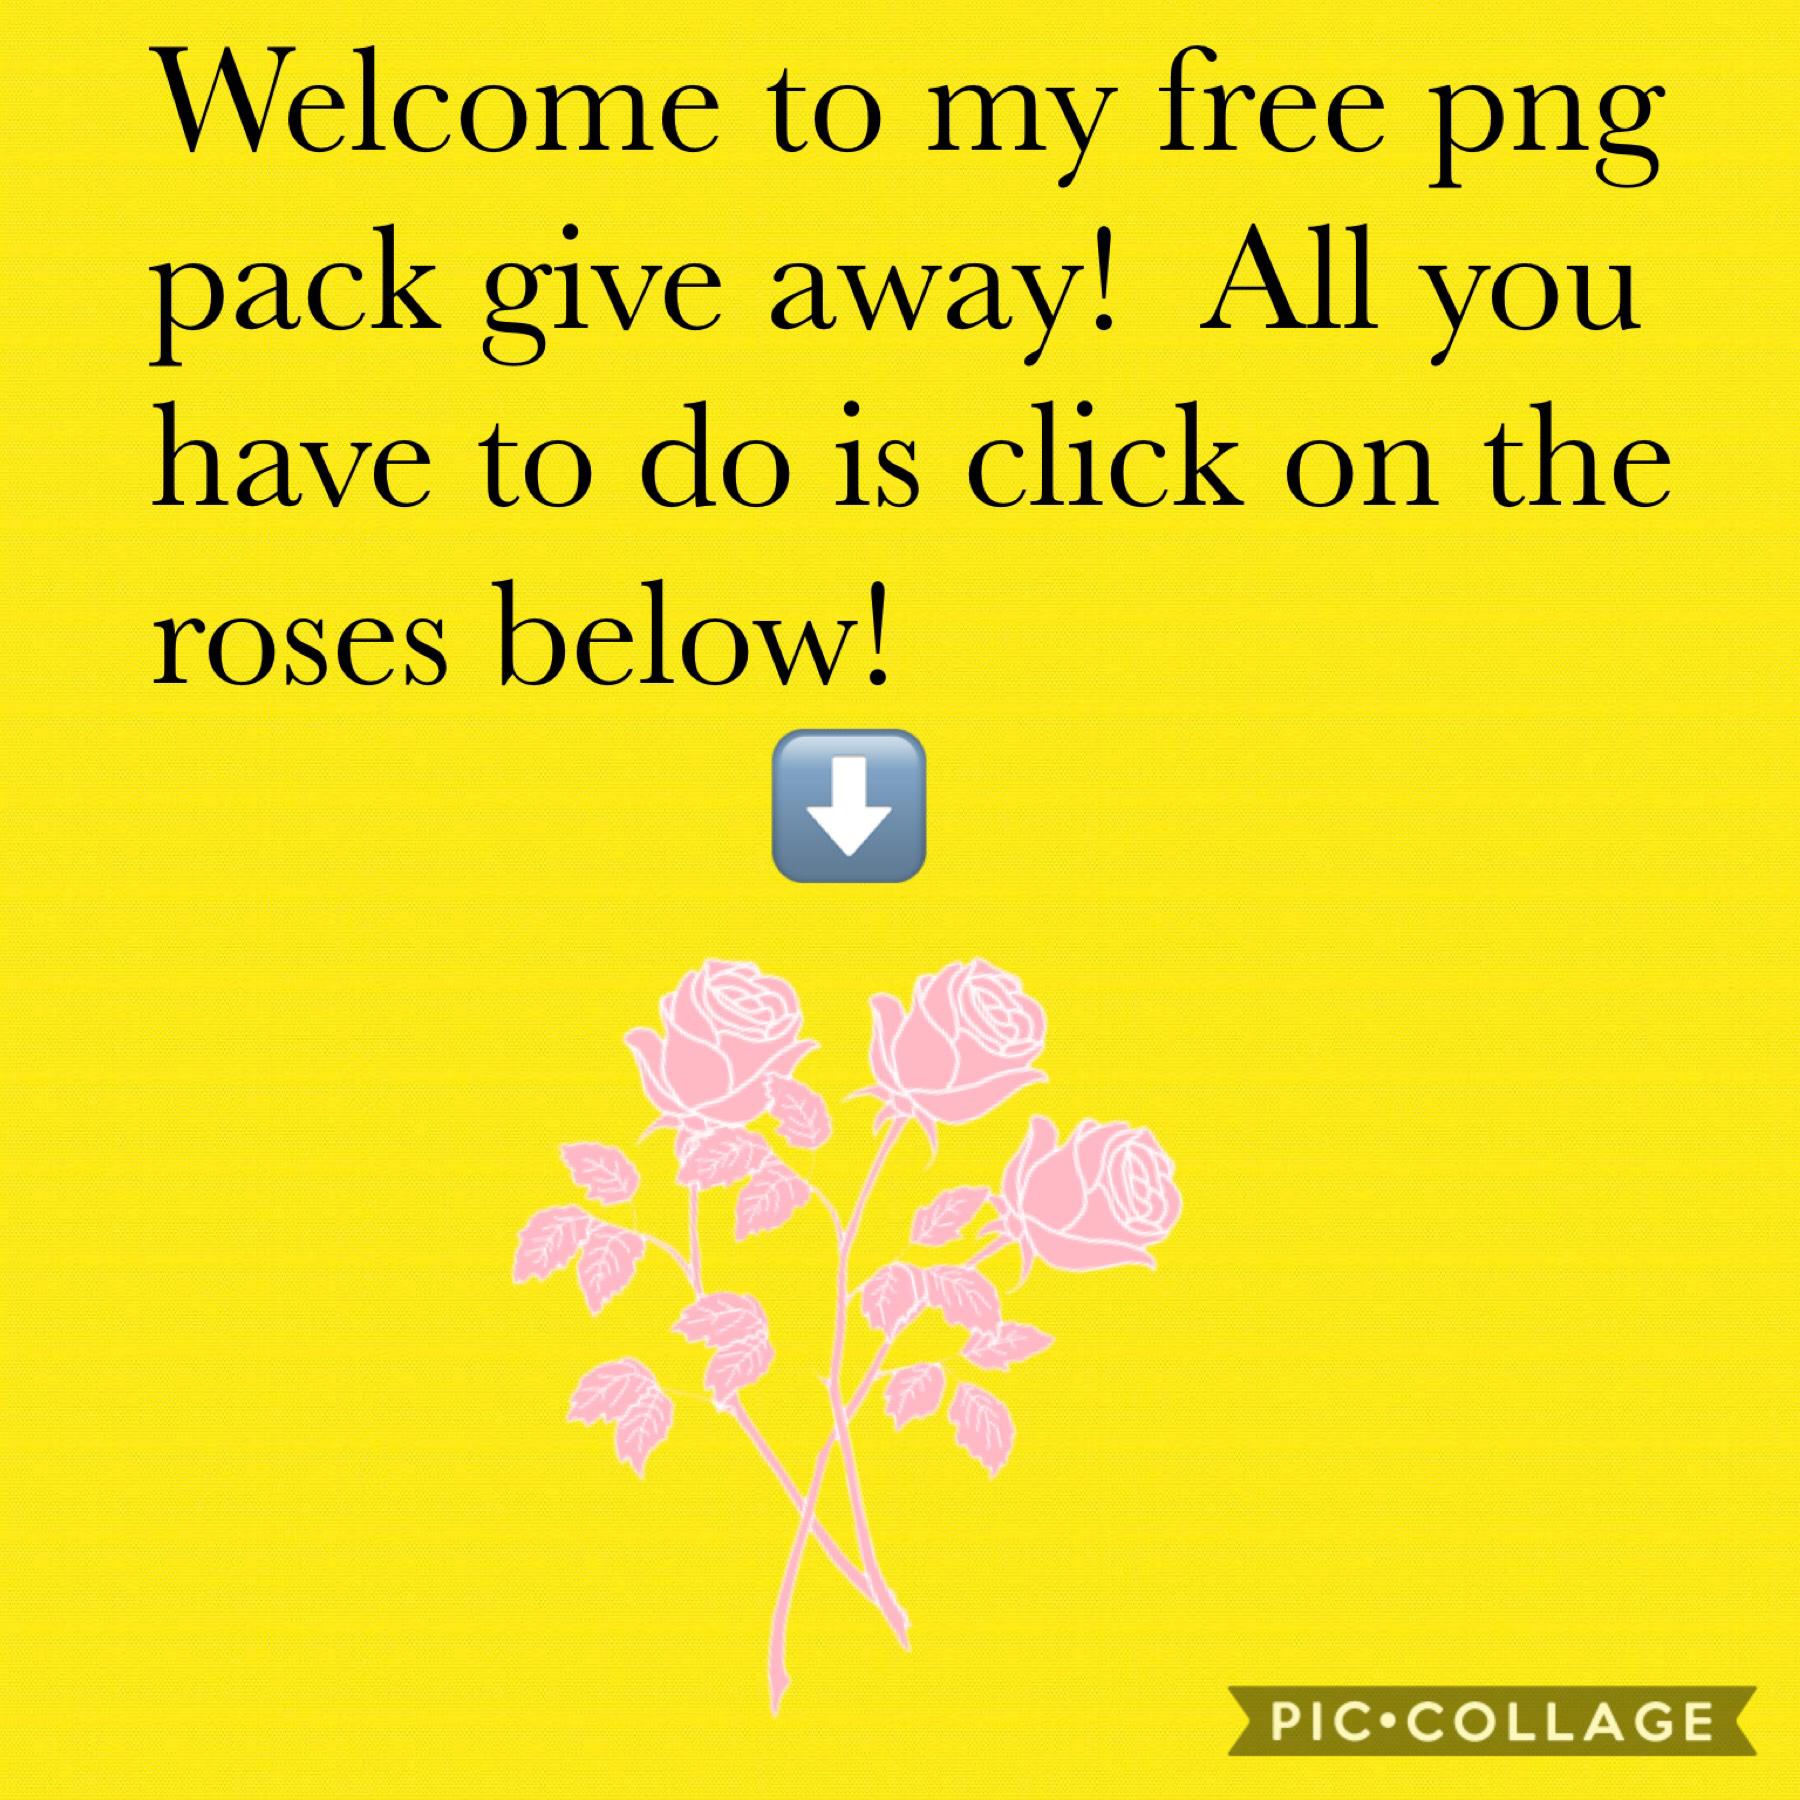 FREE PNG GIVEAWAY!!!!!